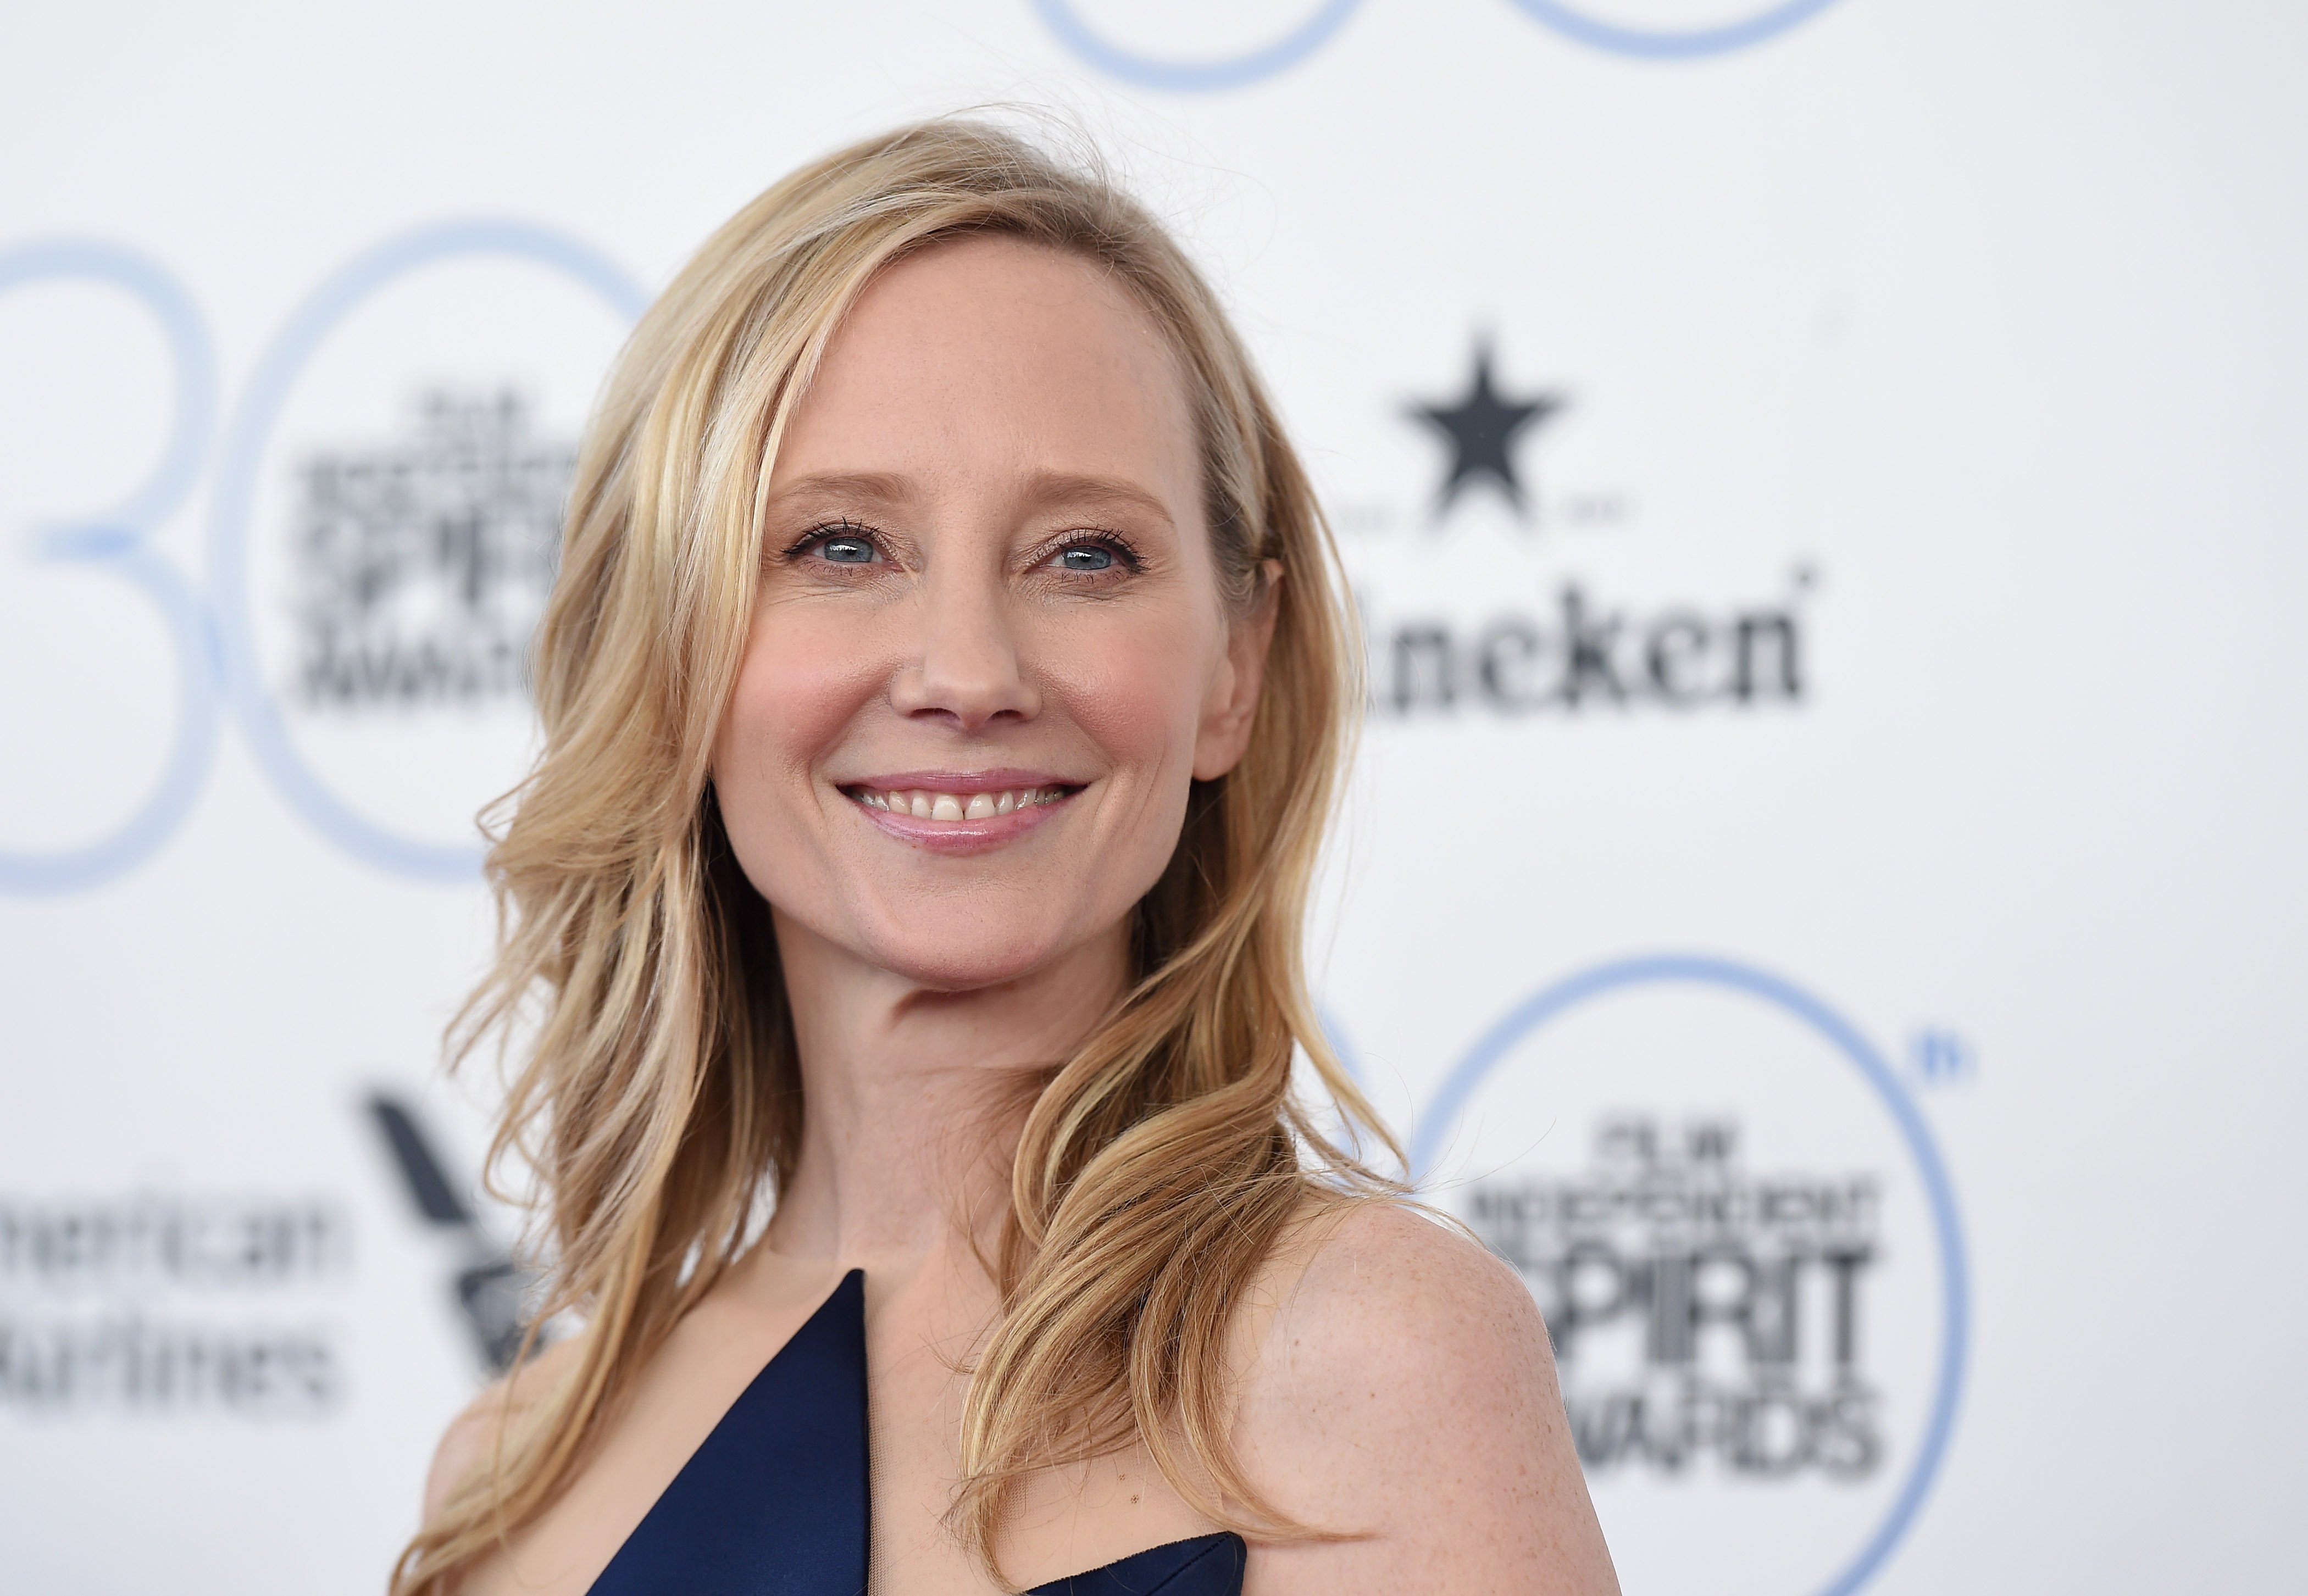 Anne Heche attends the 2015 Film Independent Spirit Awards.